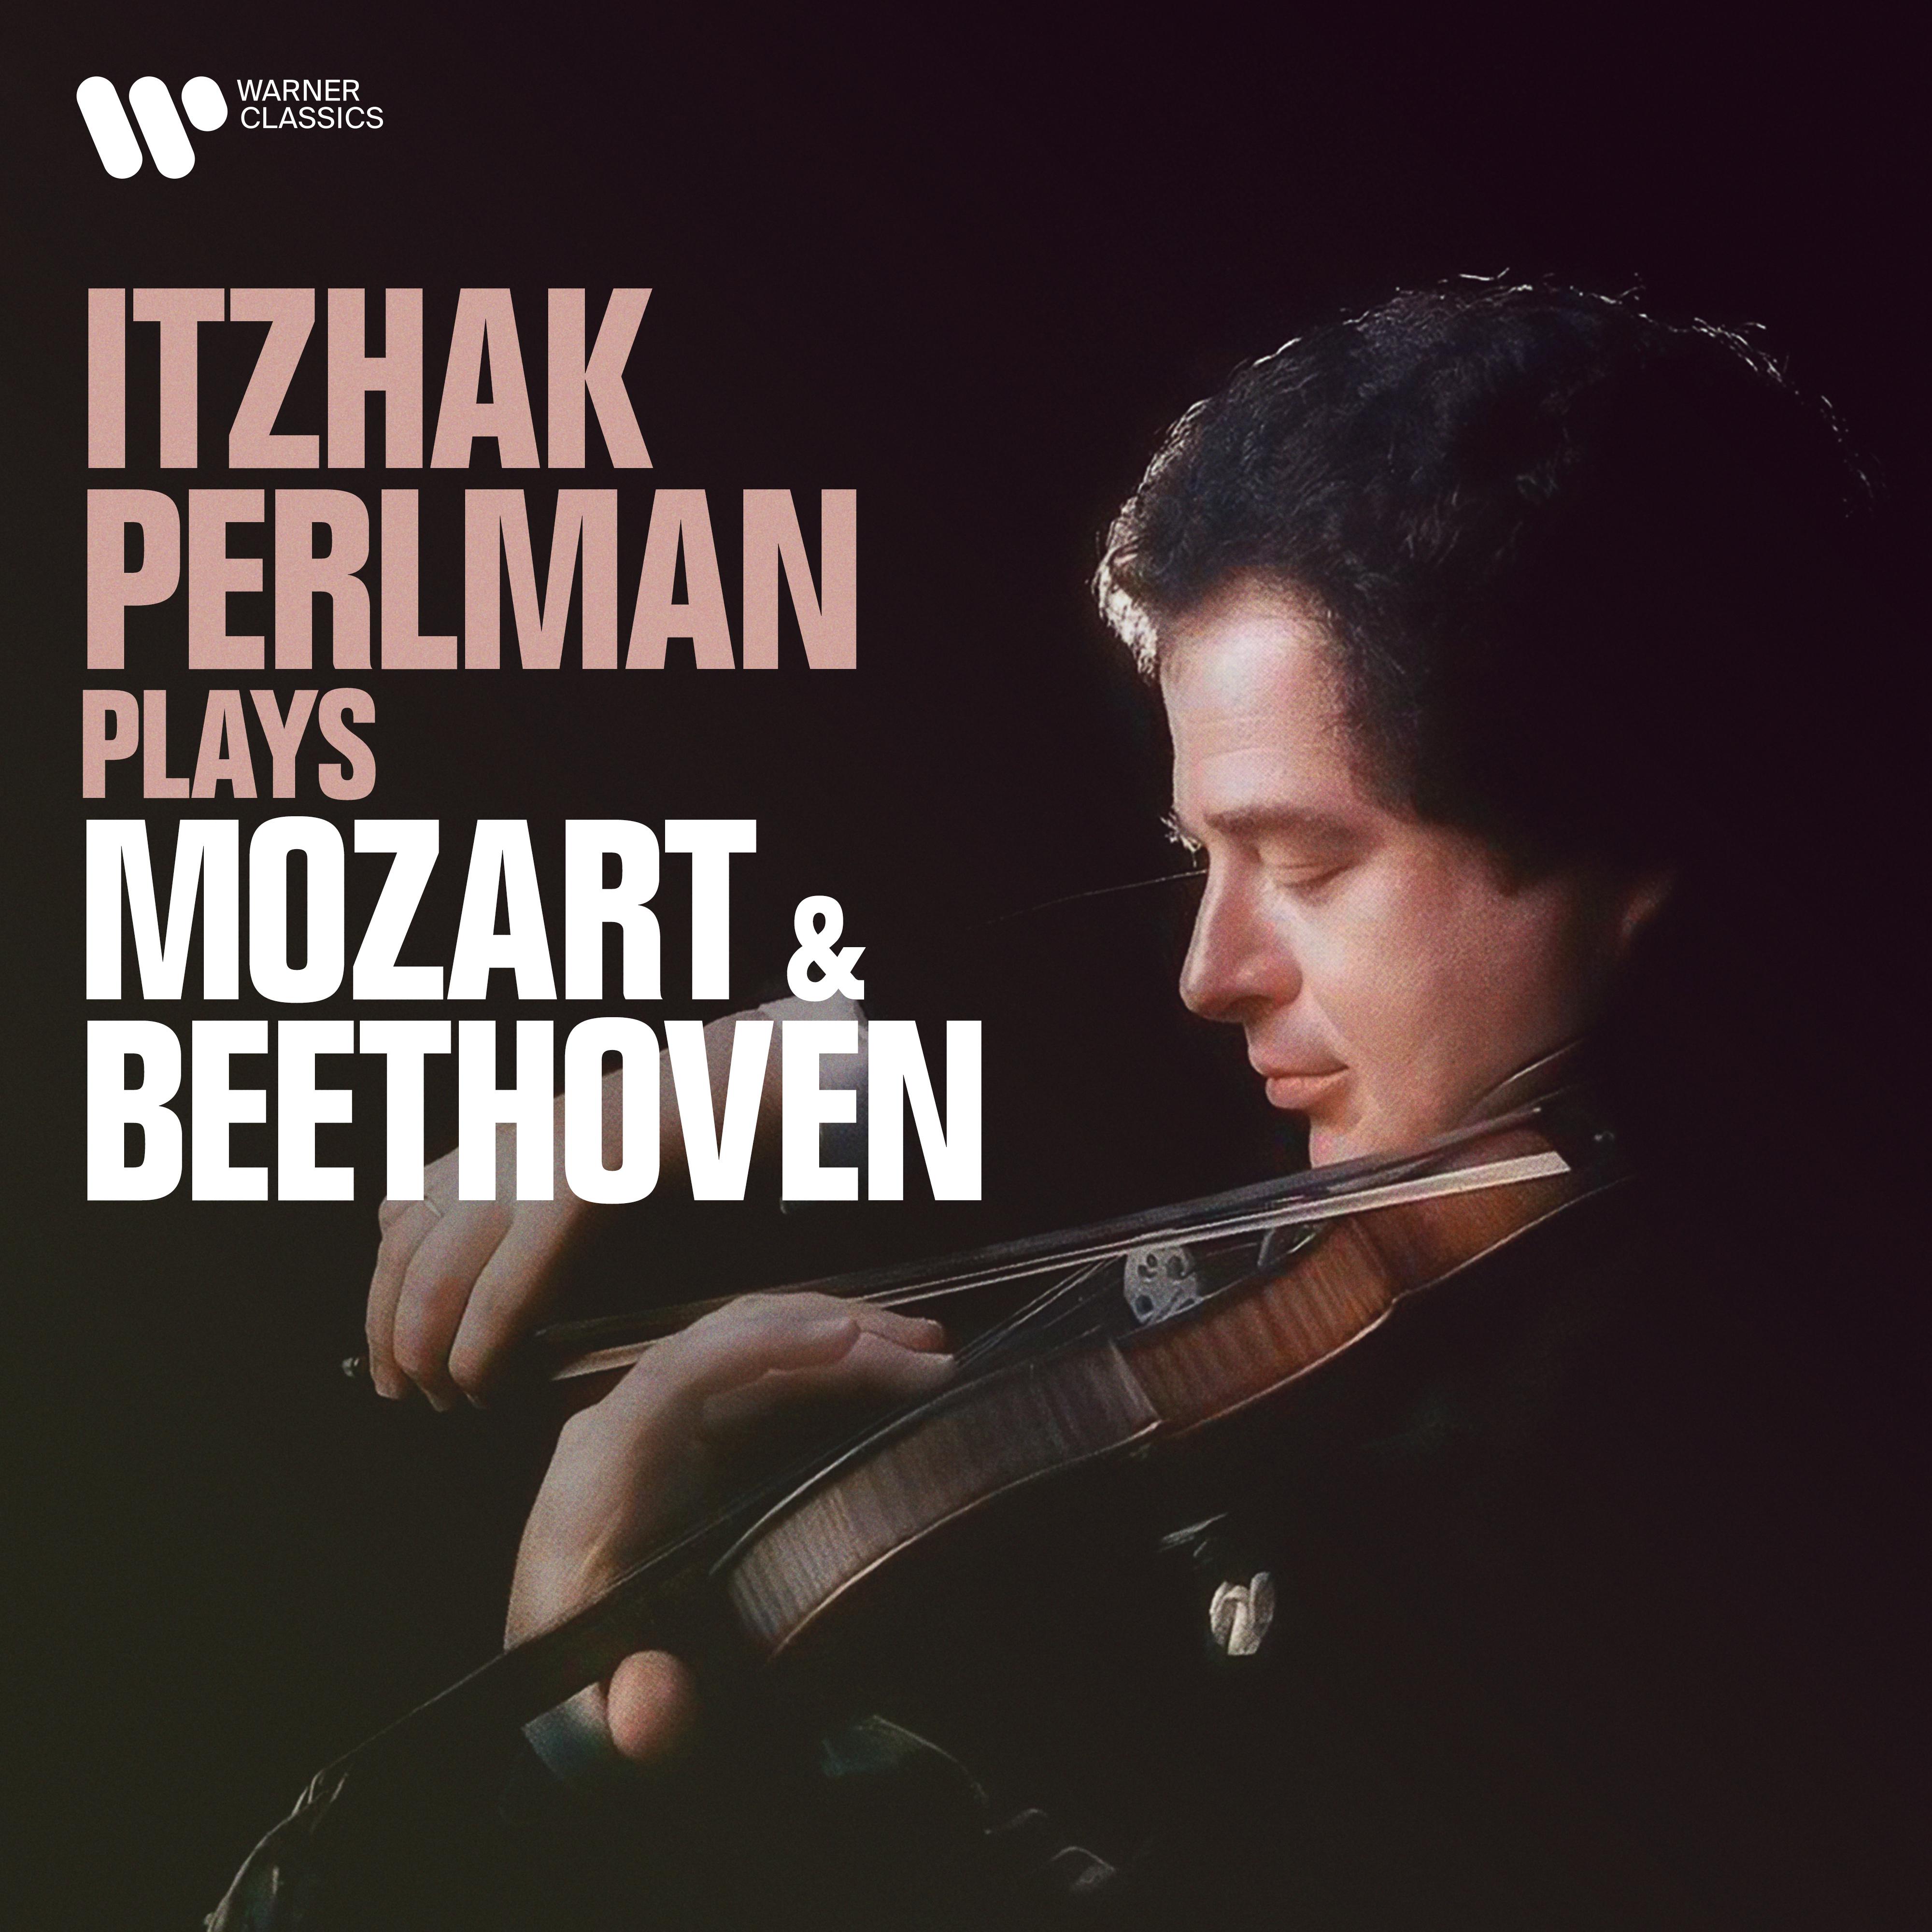 Berliner Philharmoniker - Romance for Violin and Orchestra No. 2 in F Major, Op. 50